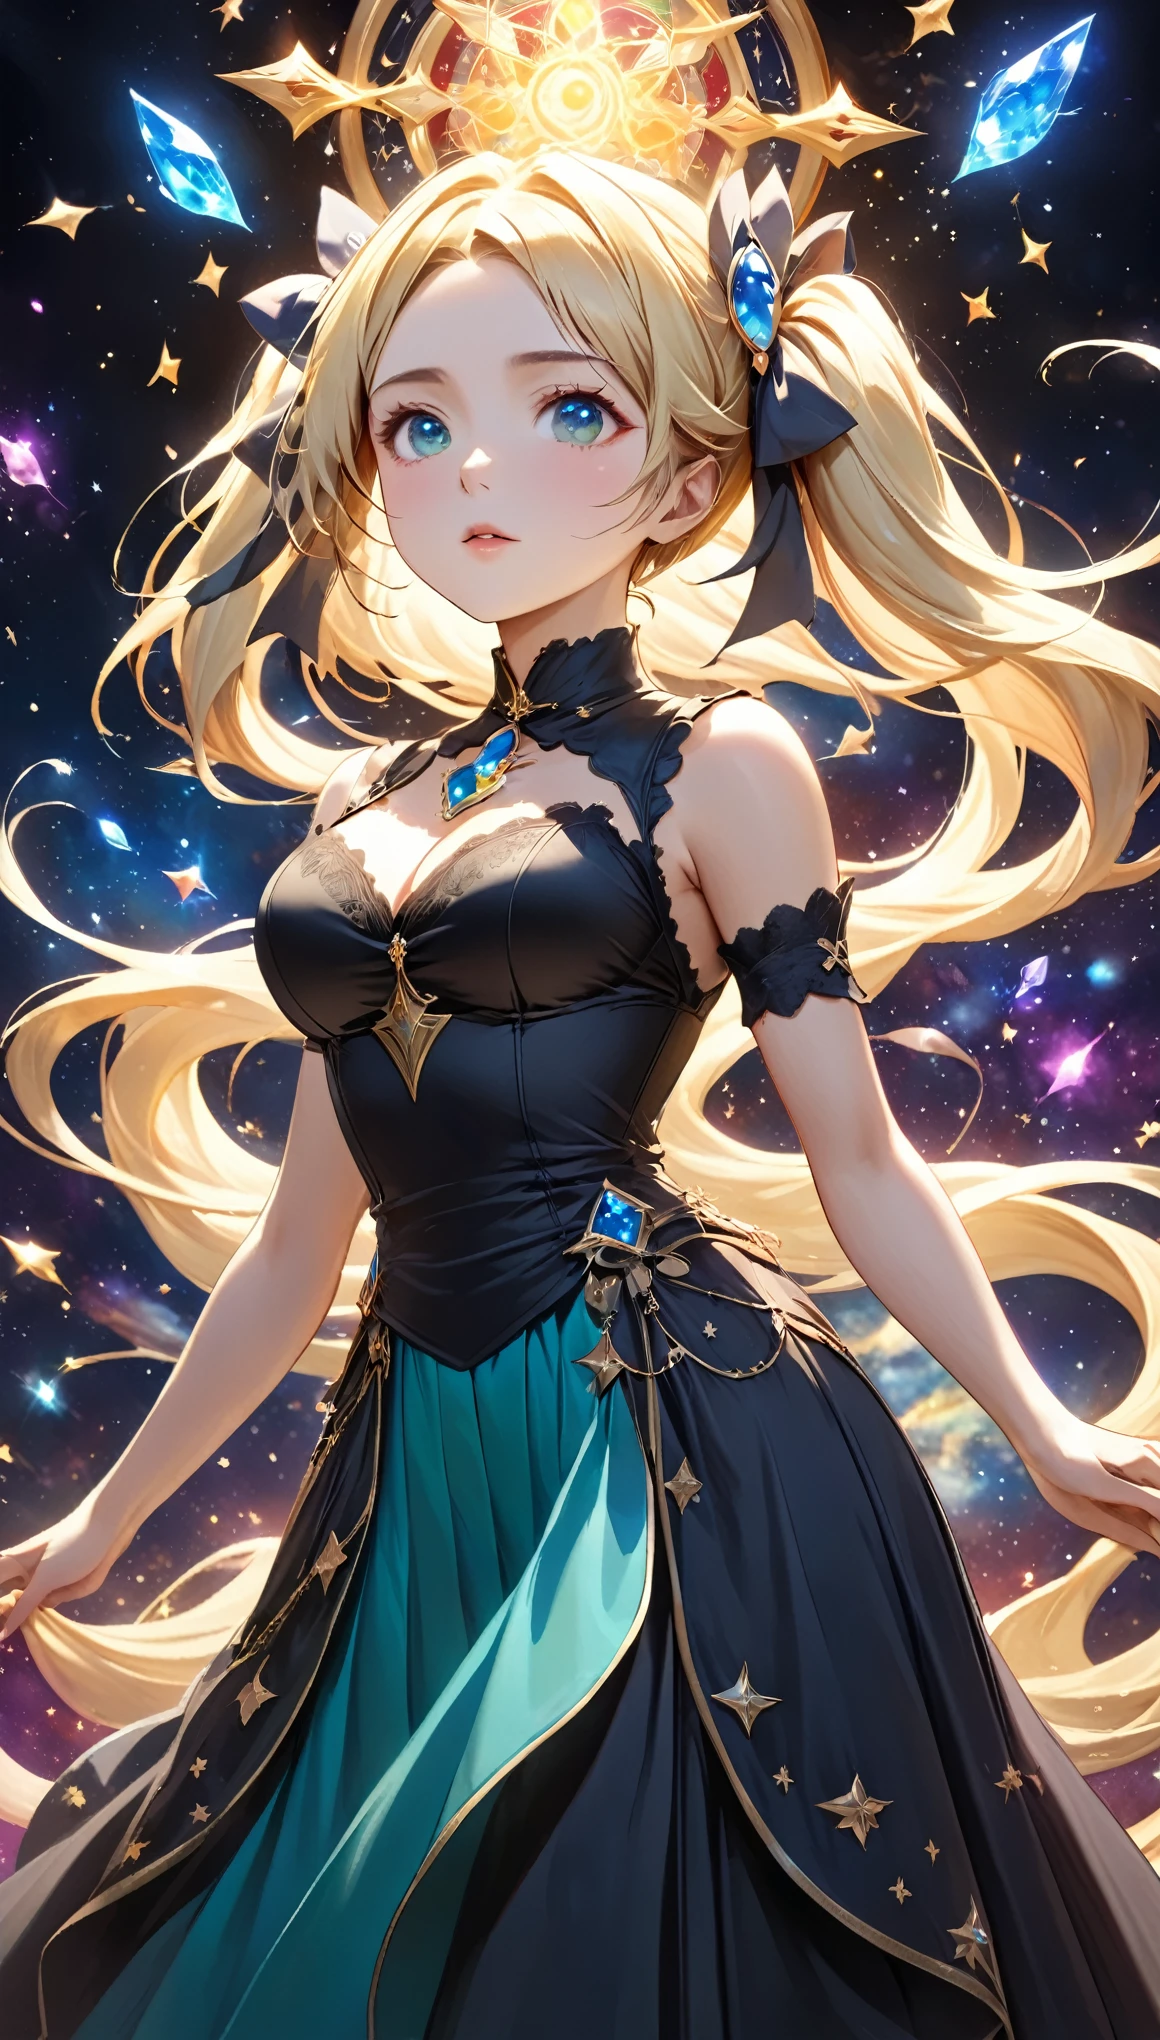 8K resolution, masterpiece, Highest quality, Award-winning works, unrealistic, Only sexy women, healthy shaped body, Age 25, White wavy long hair, twin tail, hair band, huge firm bouncing busts, witch, royal coat of arms, elegant, Very detailed, Digital Painting, artステーション, コンセプトart, Smooth, Sharp focus, shape, artジャム、Greg Rutkowski、Alphonse Mucha、William Adolphe Bouguereau、art：Stephanie Law , Magnificent cosmic background, Royal Jewel, nature, Full Shot, Symmetric, Greg Rutkowski, Charlie Bowwater, beep, Unreal 5, Surreal, Dynamic Lighting, ファンタジーart, Complex colors, カラフルなmagic陣, magic, Small face, Very delicate facial expressions, Delicate eye depiction, Upper body close-up,, erotic, dynamic sexy poses, One sexy woman, Healthy body shape, 24-year-old woman, doaxvv_marie rose, witch, Height: 170cm, big firm bouncing busts, , blonde very long wavy hair, twin tail,, Glaring at the camera, Looking up, Invincible laughter, A complex, gothic-style long dress, , Green long skirt, garter belt, Brown Loafers, Standing Alone